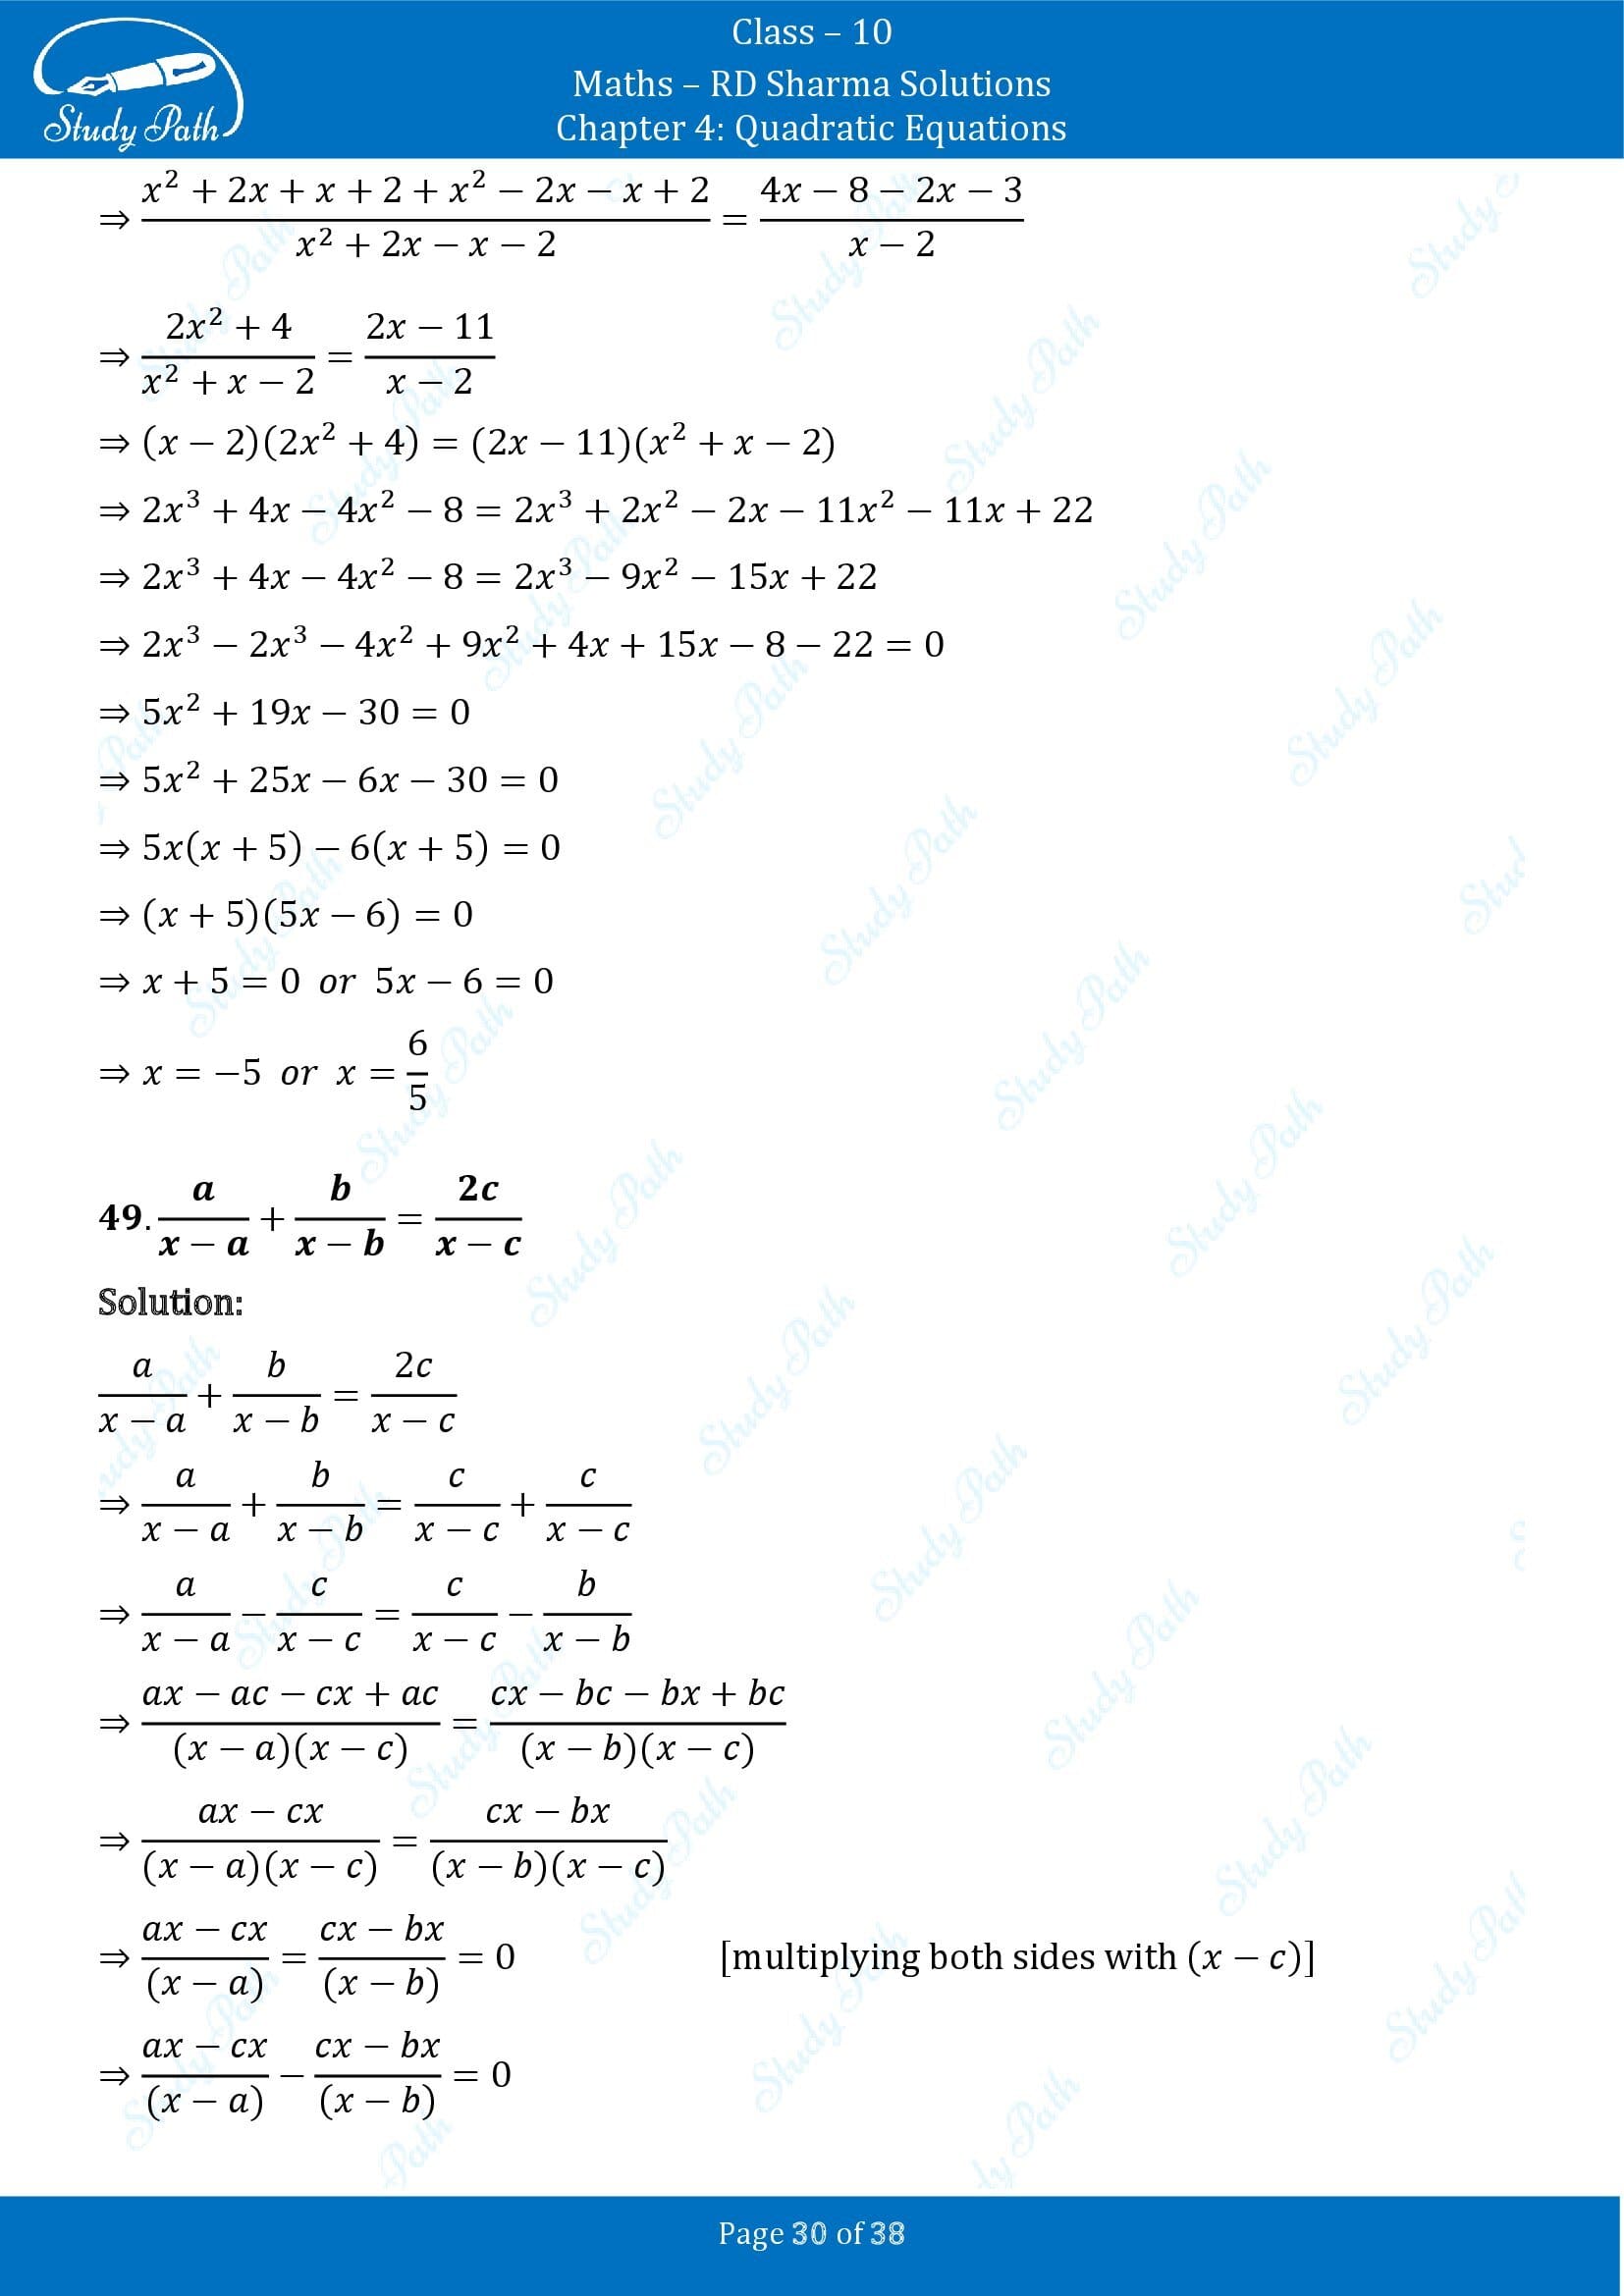 RD Sharma Solutions Class 10 Chapter 4 Quadratic Equations Exercise 4.3 00030